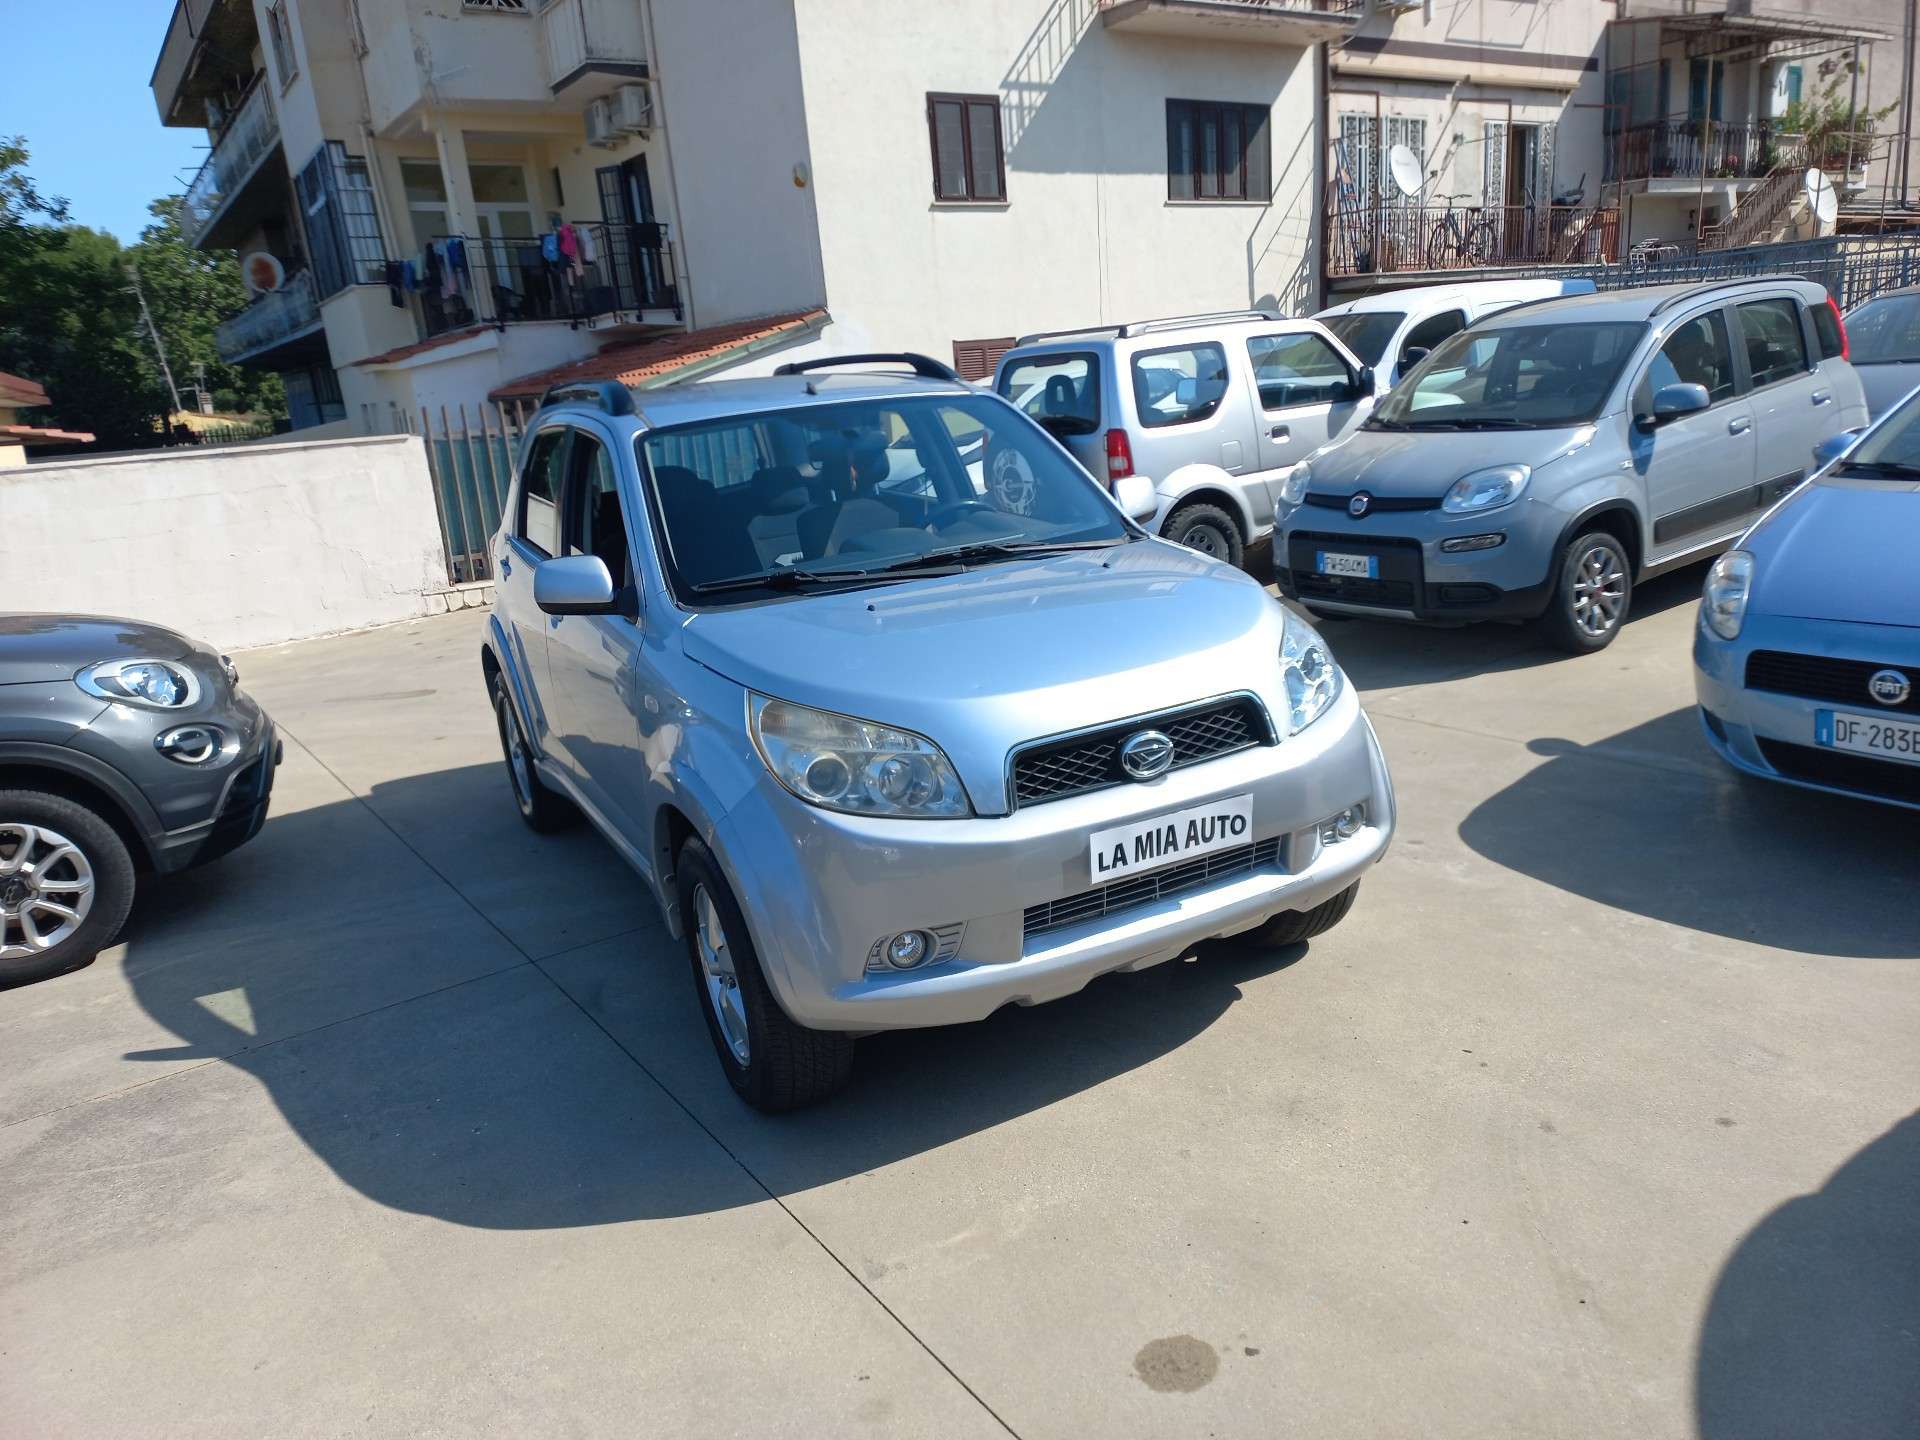 Daihatsu Terios Off-Road/Pick-up in Grey used in Roma - Rm for € 7,850.-